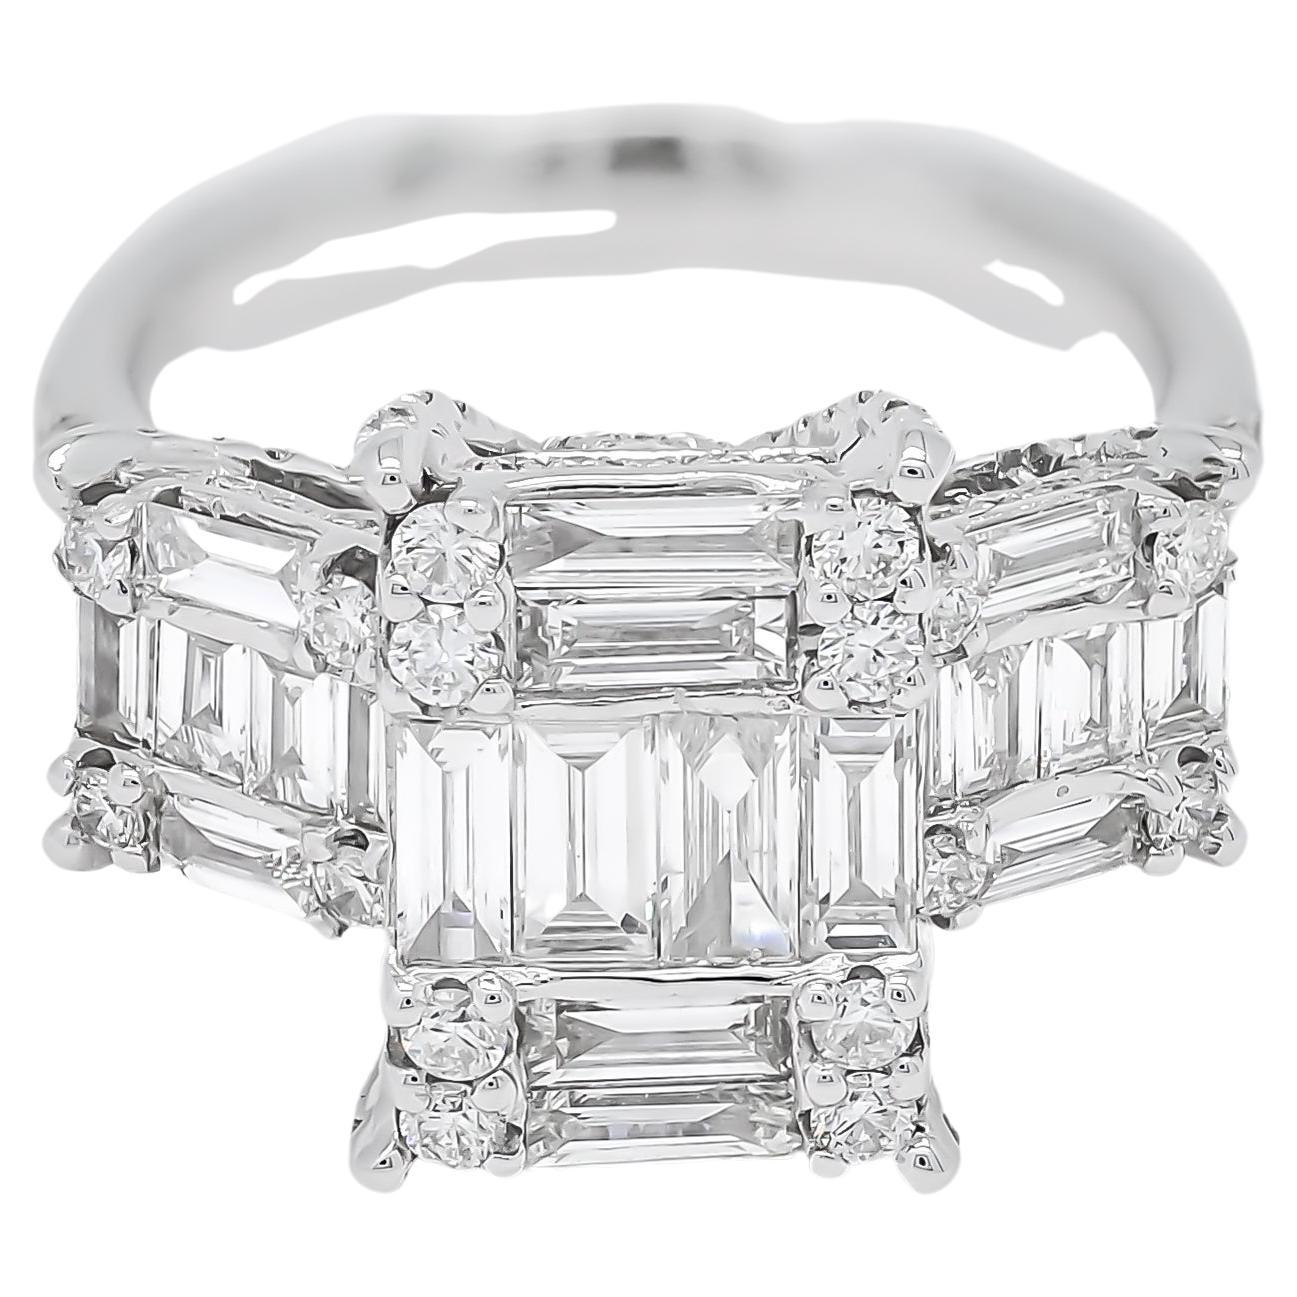 A trio of baguette clusters are framed by beautiful Setting on this stunning diamond engagement ring, set in gleaming white gold. 

This exclusive 18 KT baguette and round diamond 3 cluster designer ring is the ultimate accessory for cocktail